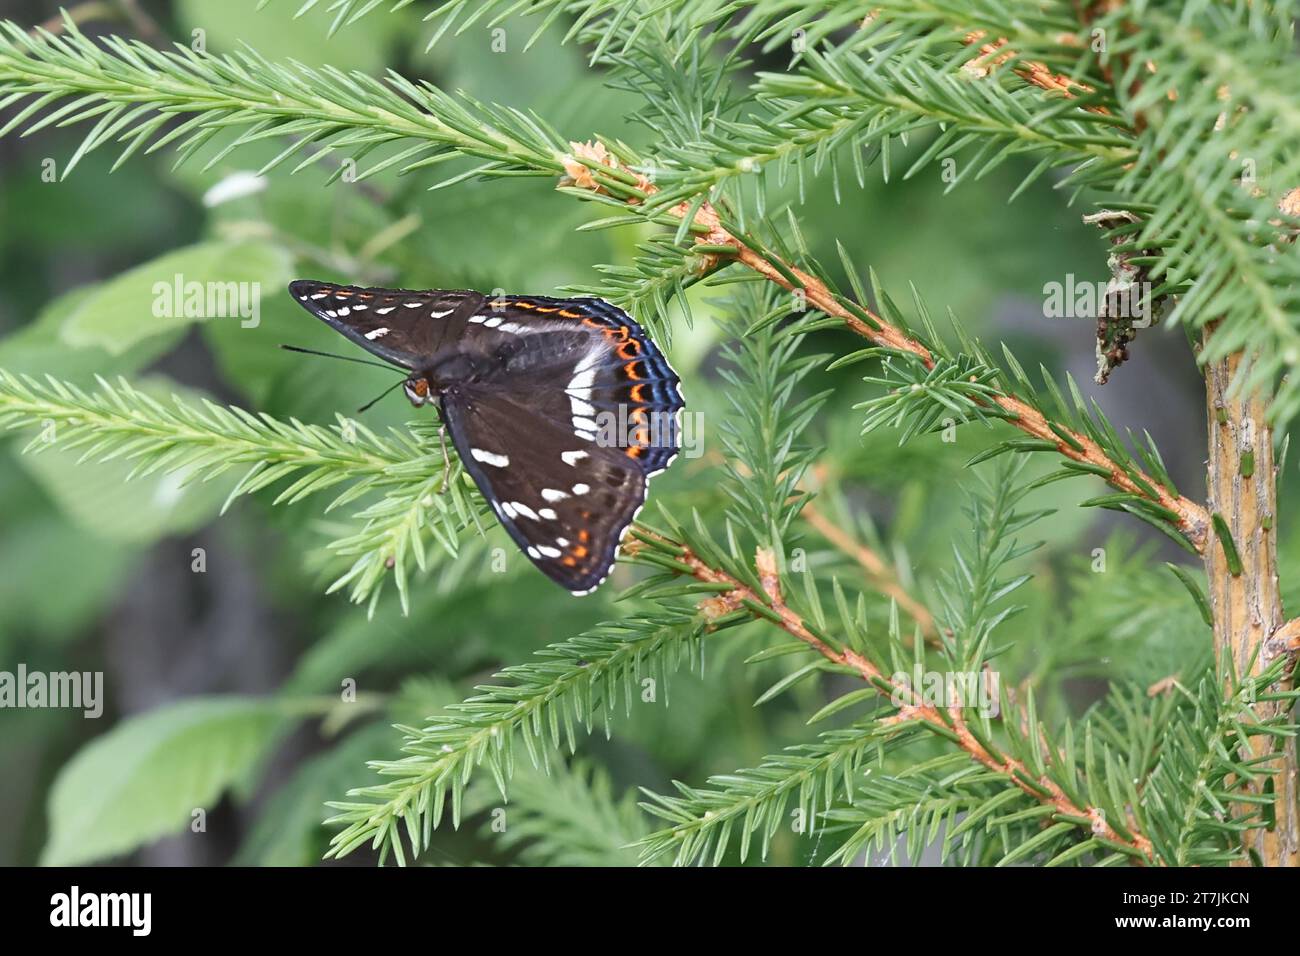 Poplar Admiral, Limenitis populi, butterfly from Finland Stock Photo